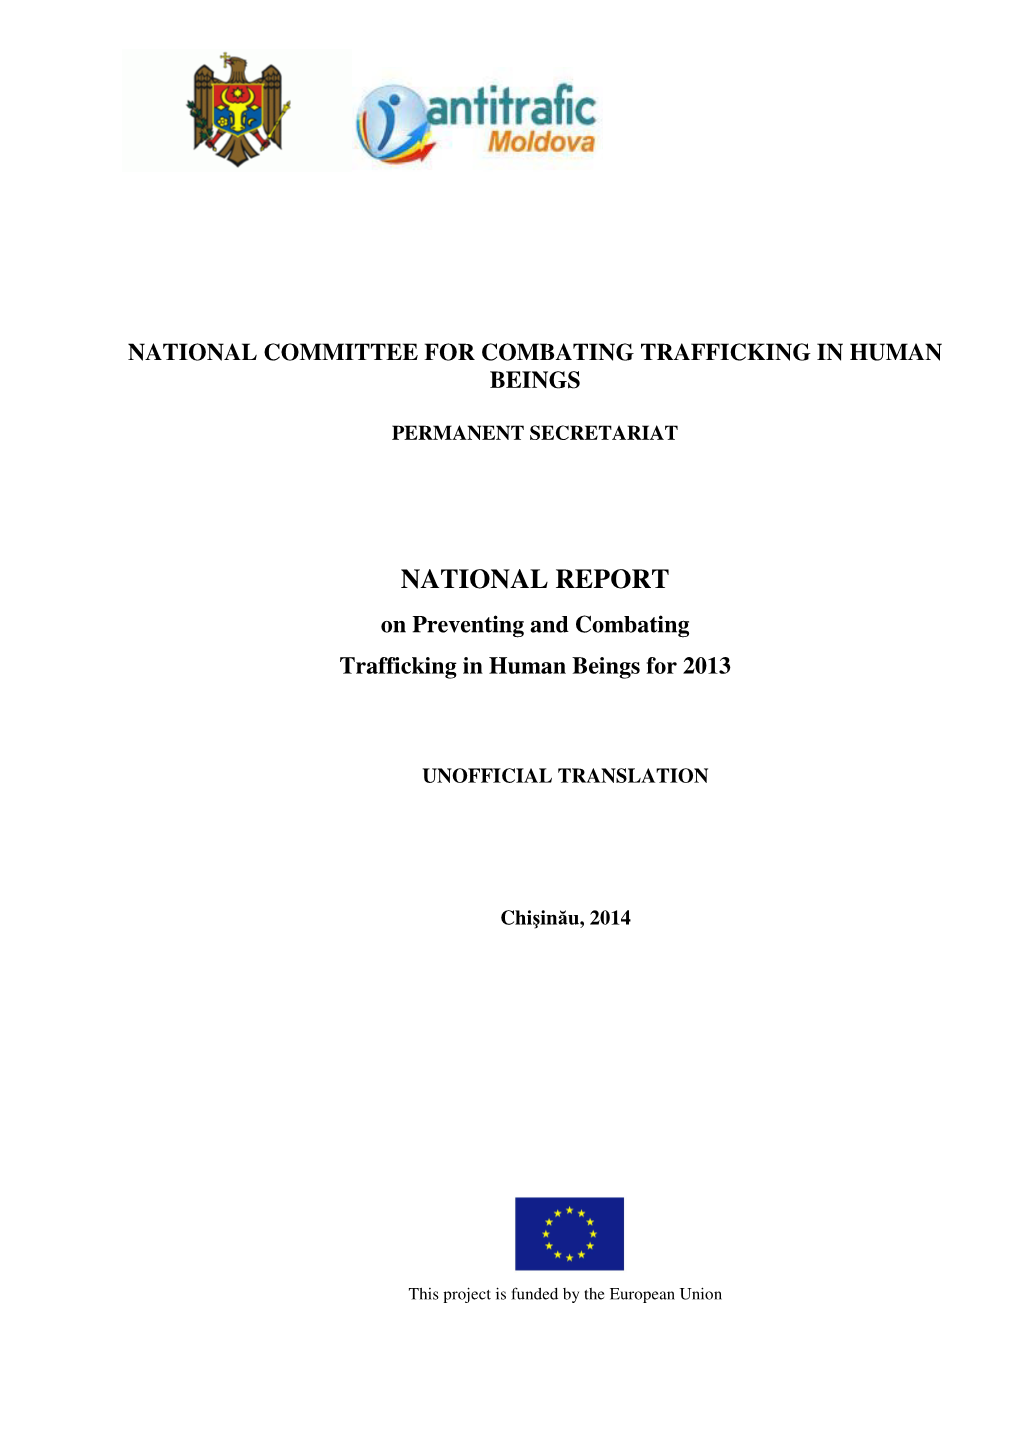 NATIONAL REPORT on Preventing and Combating Trafficking in Human Beings for 2013